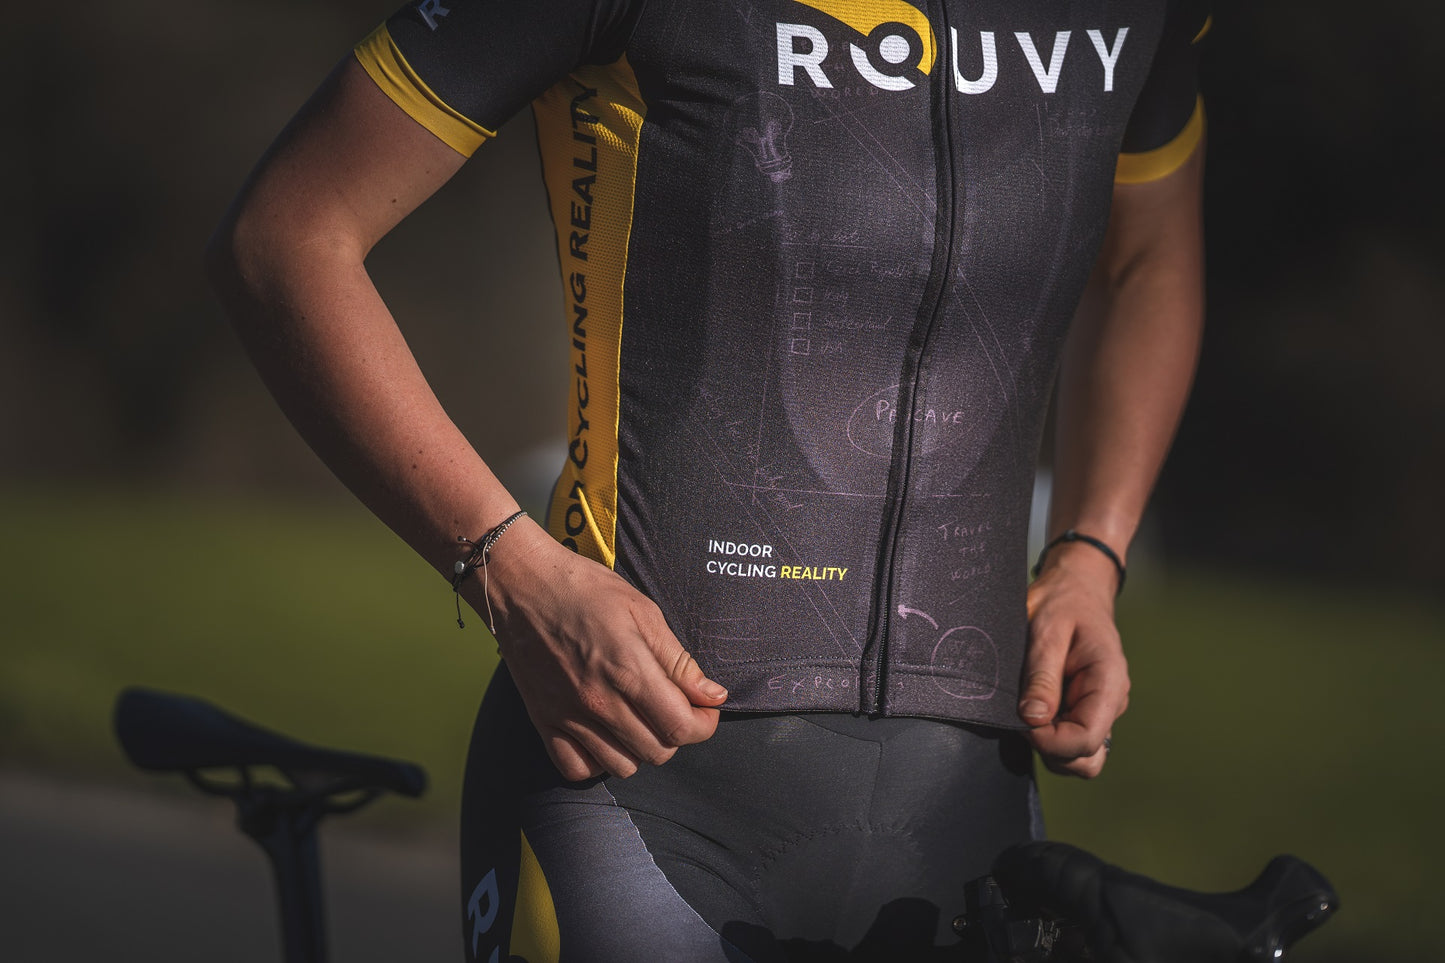 ROUVY Jersey - Women's